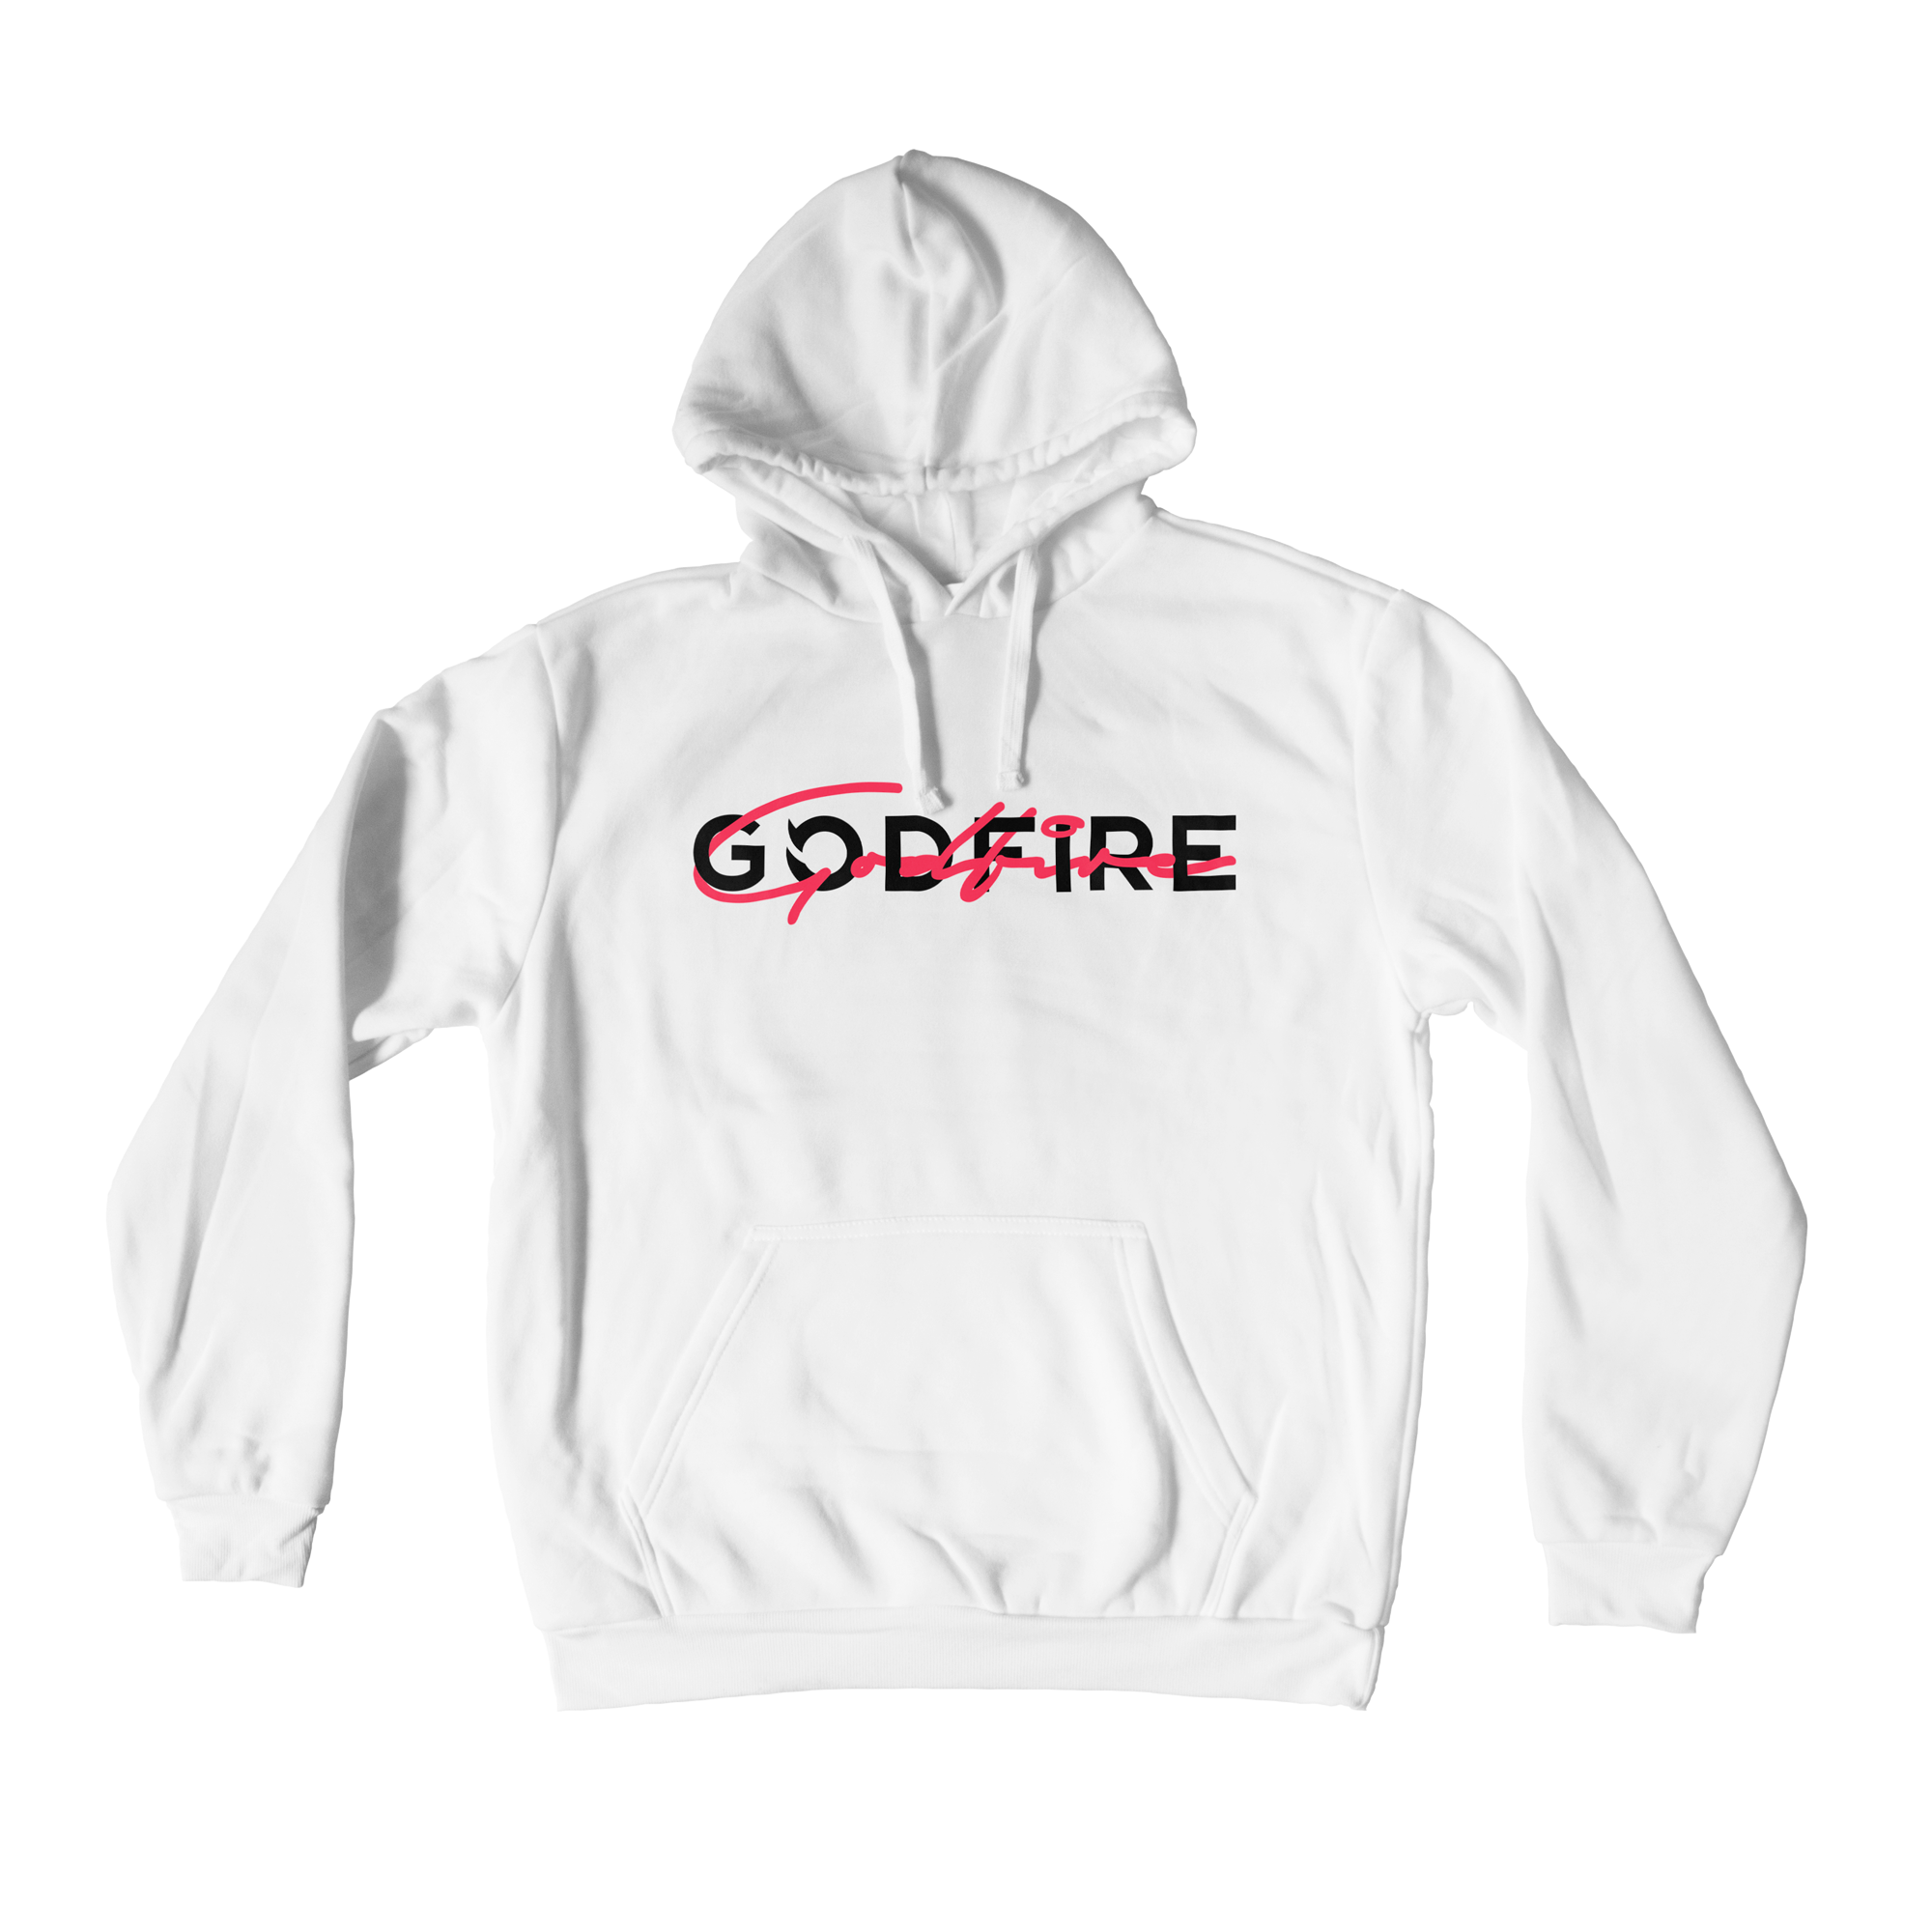 GØDFIRE Day One Hoodie